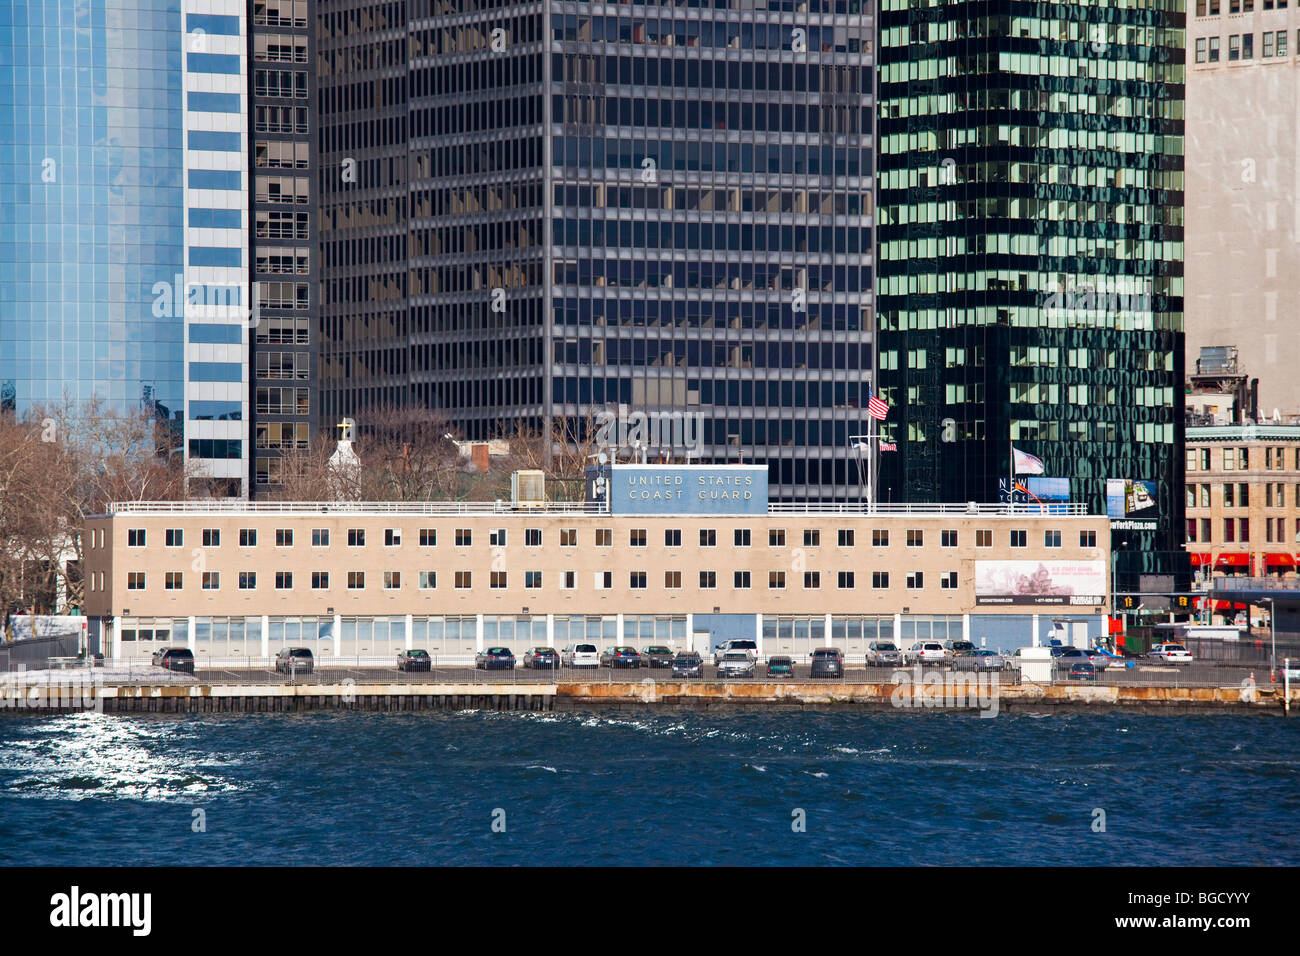 United States Coast Guard building in downtown Manhattan, New York City Stock Photo